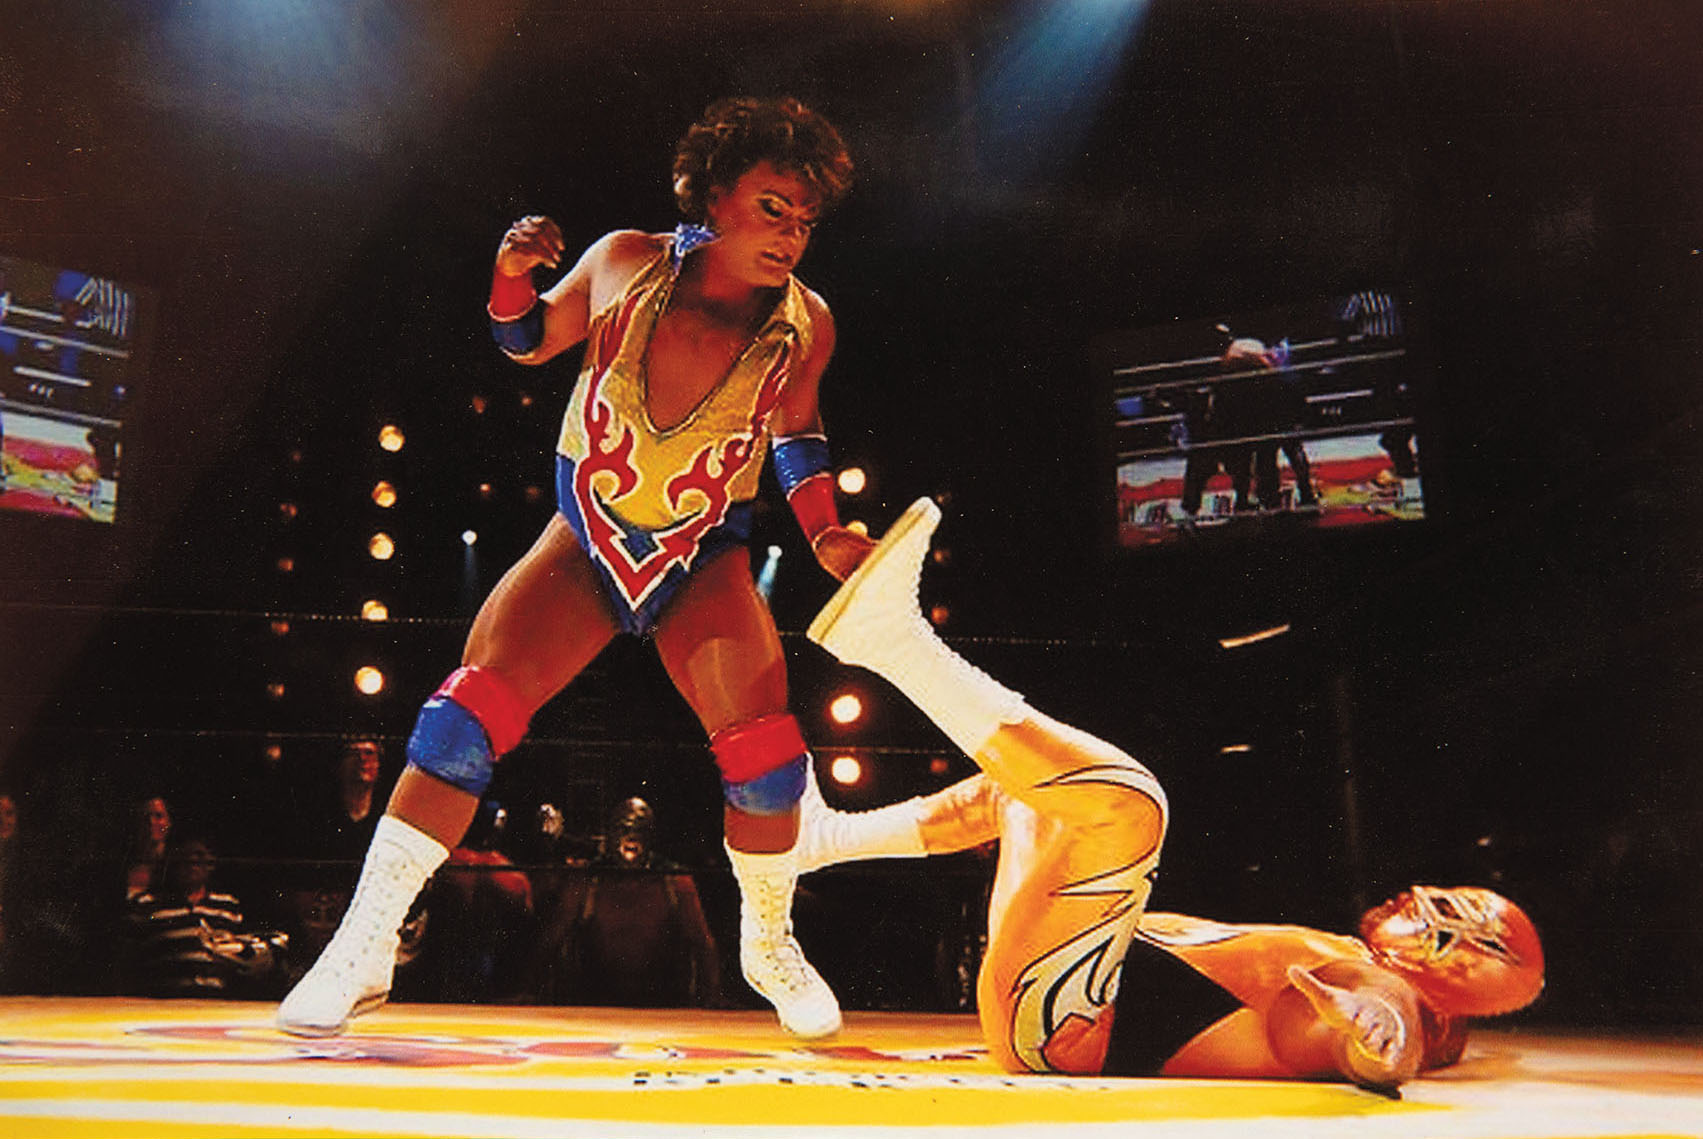 Two people in brightly-colored lucha libre costumes in a ring